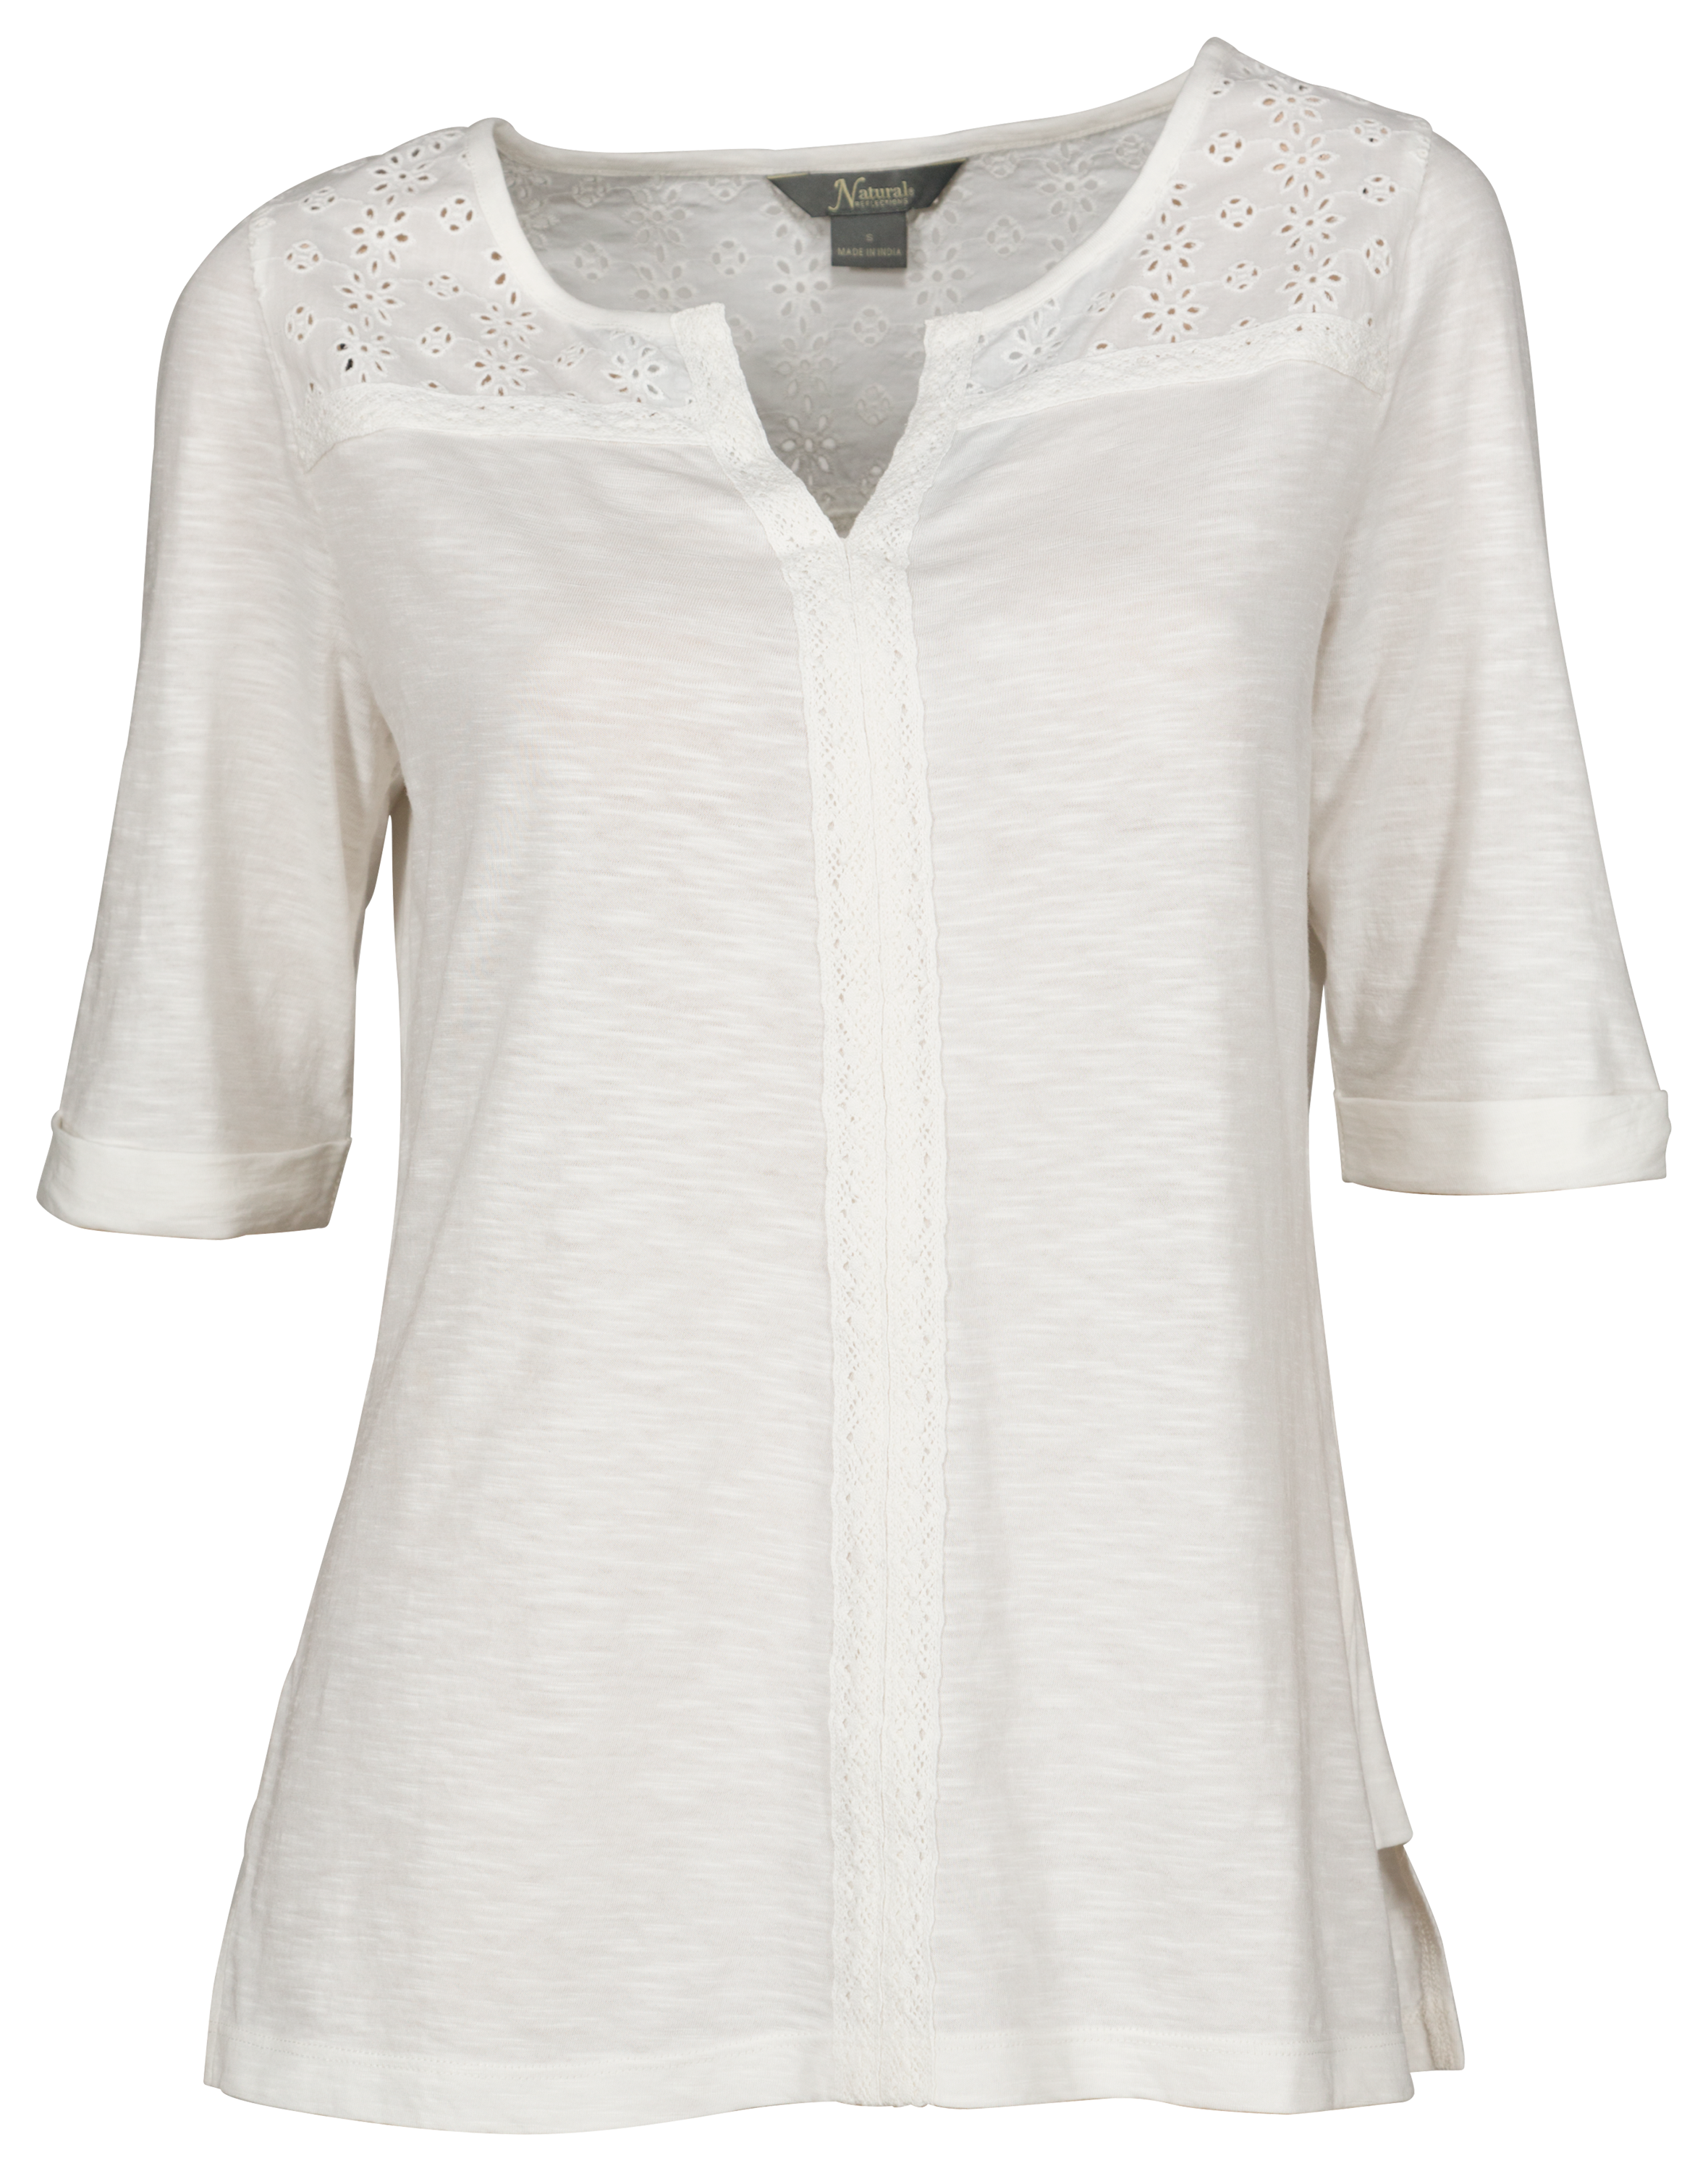 Natural Reflections Eyelet Panel Top for Ladies | Bass Pro Shops